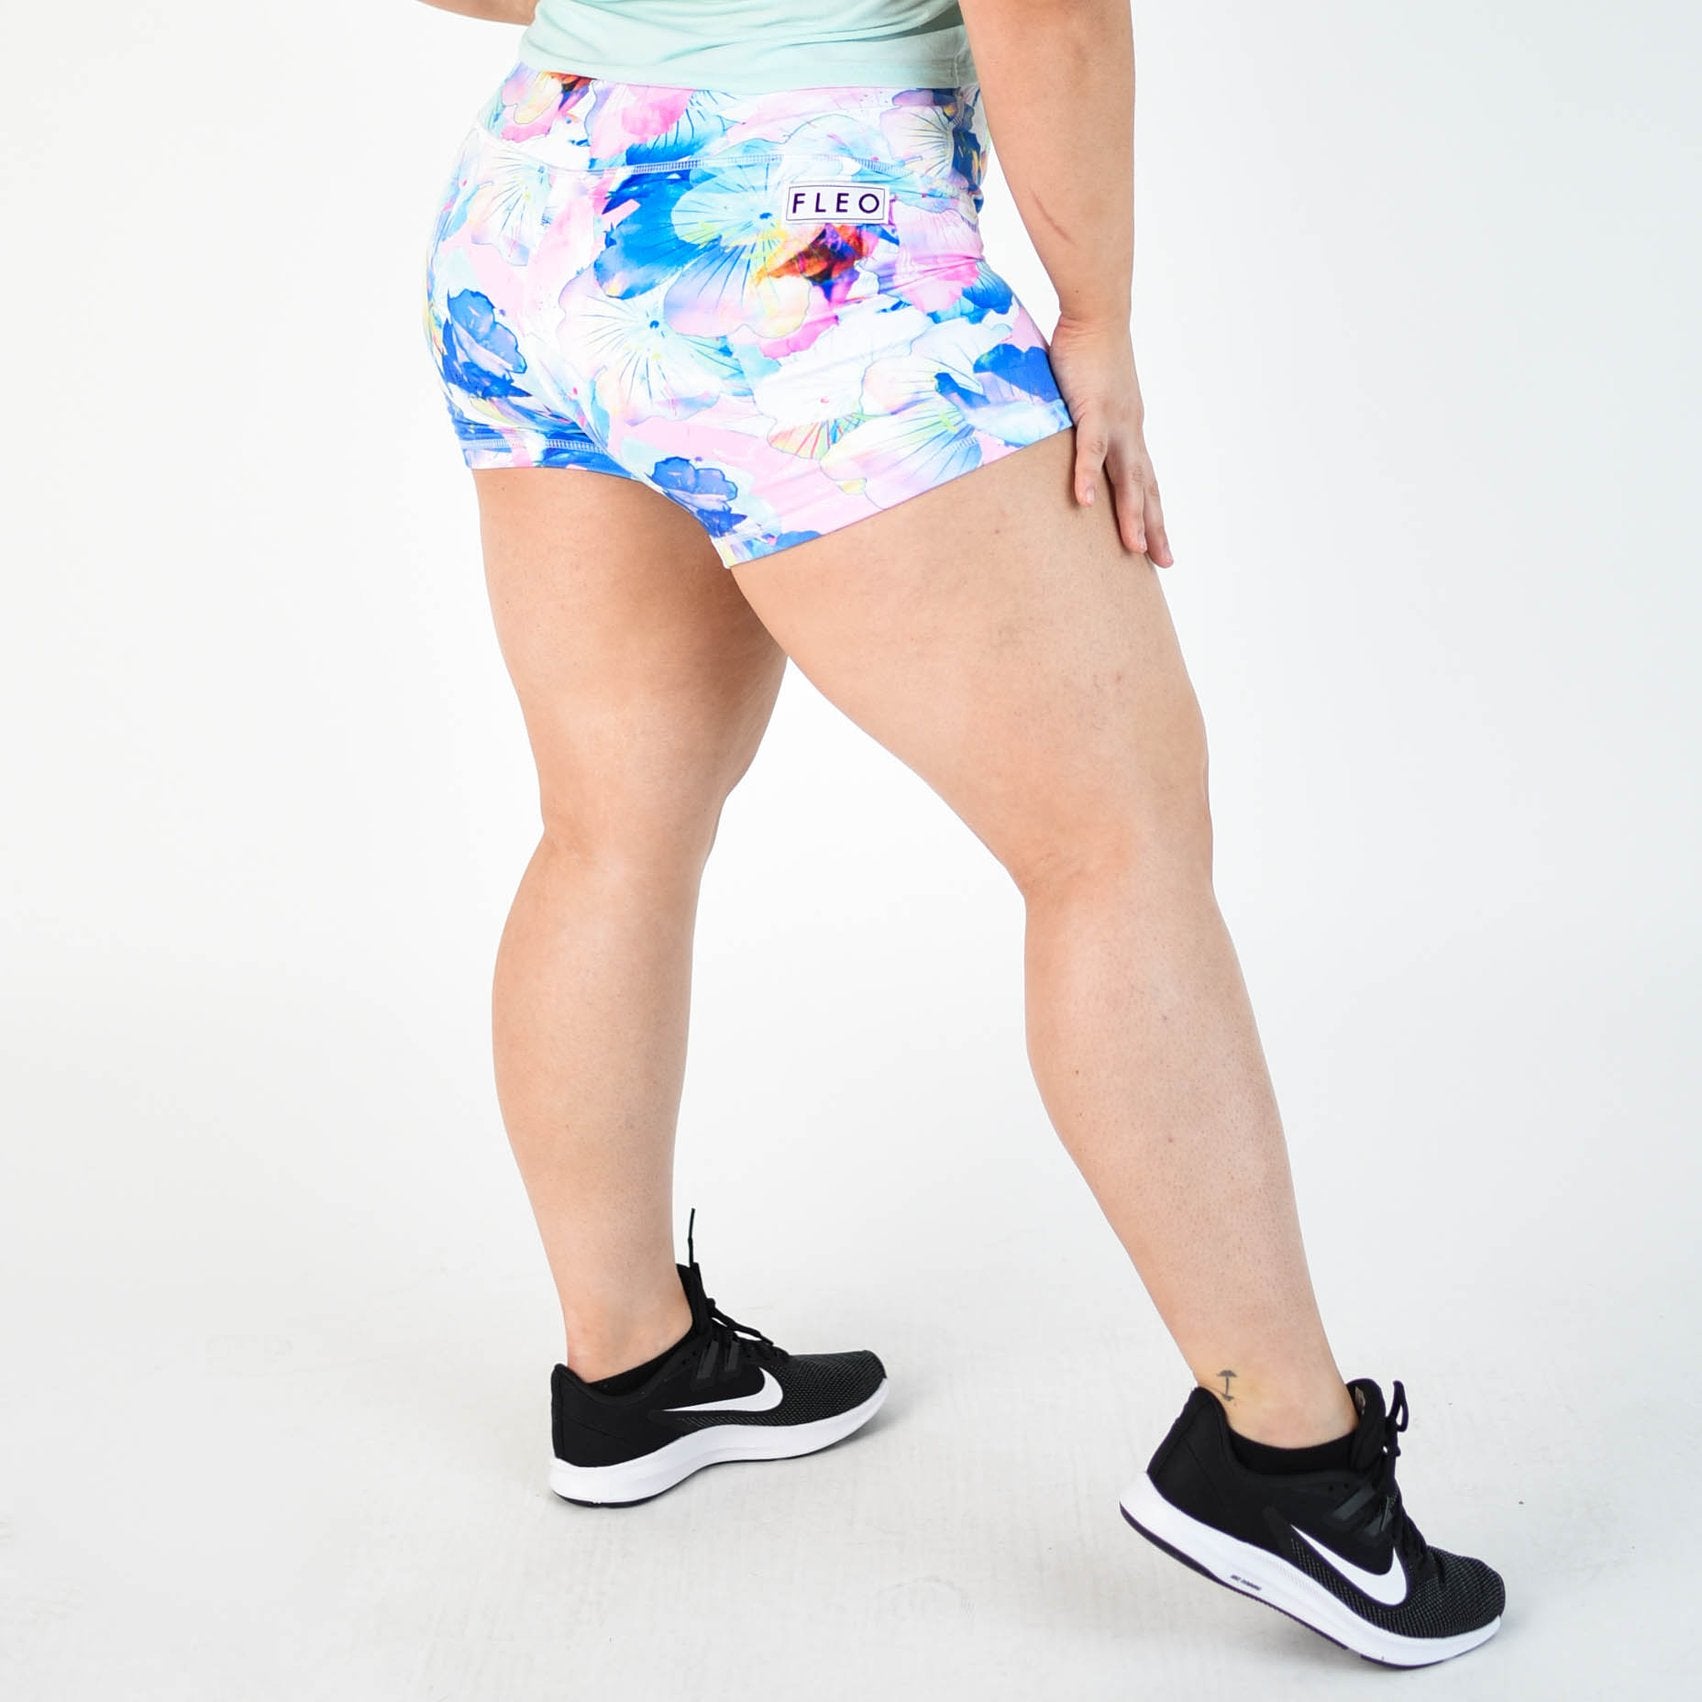 FLEO Mermaid Floral Shorts (Power High-rise) - 9 for 9